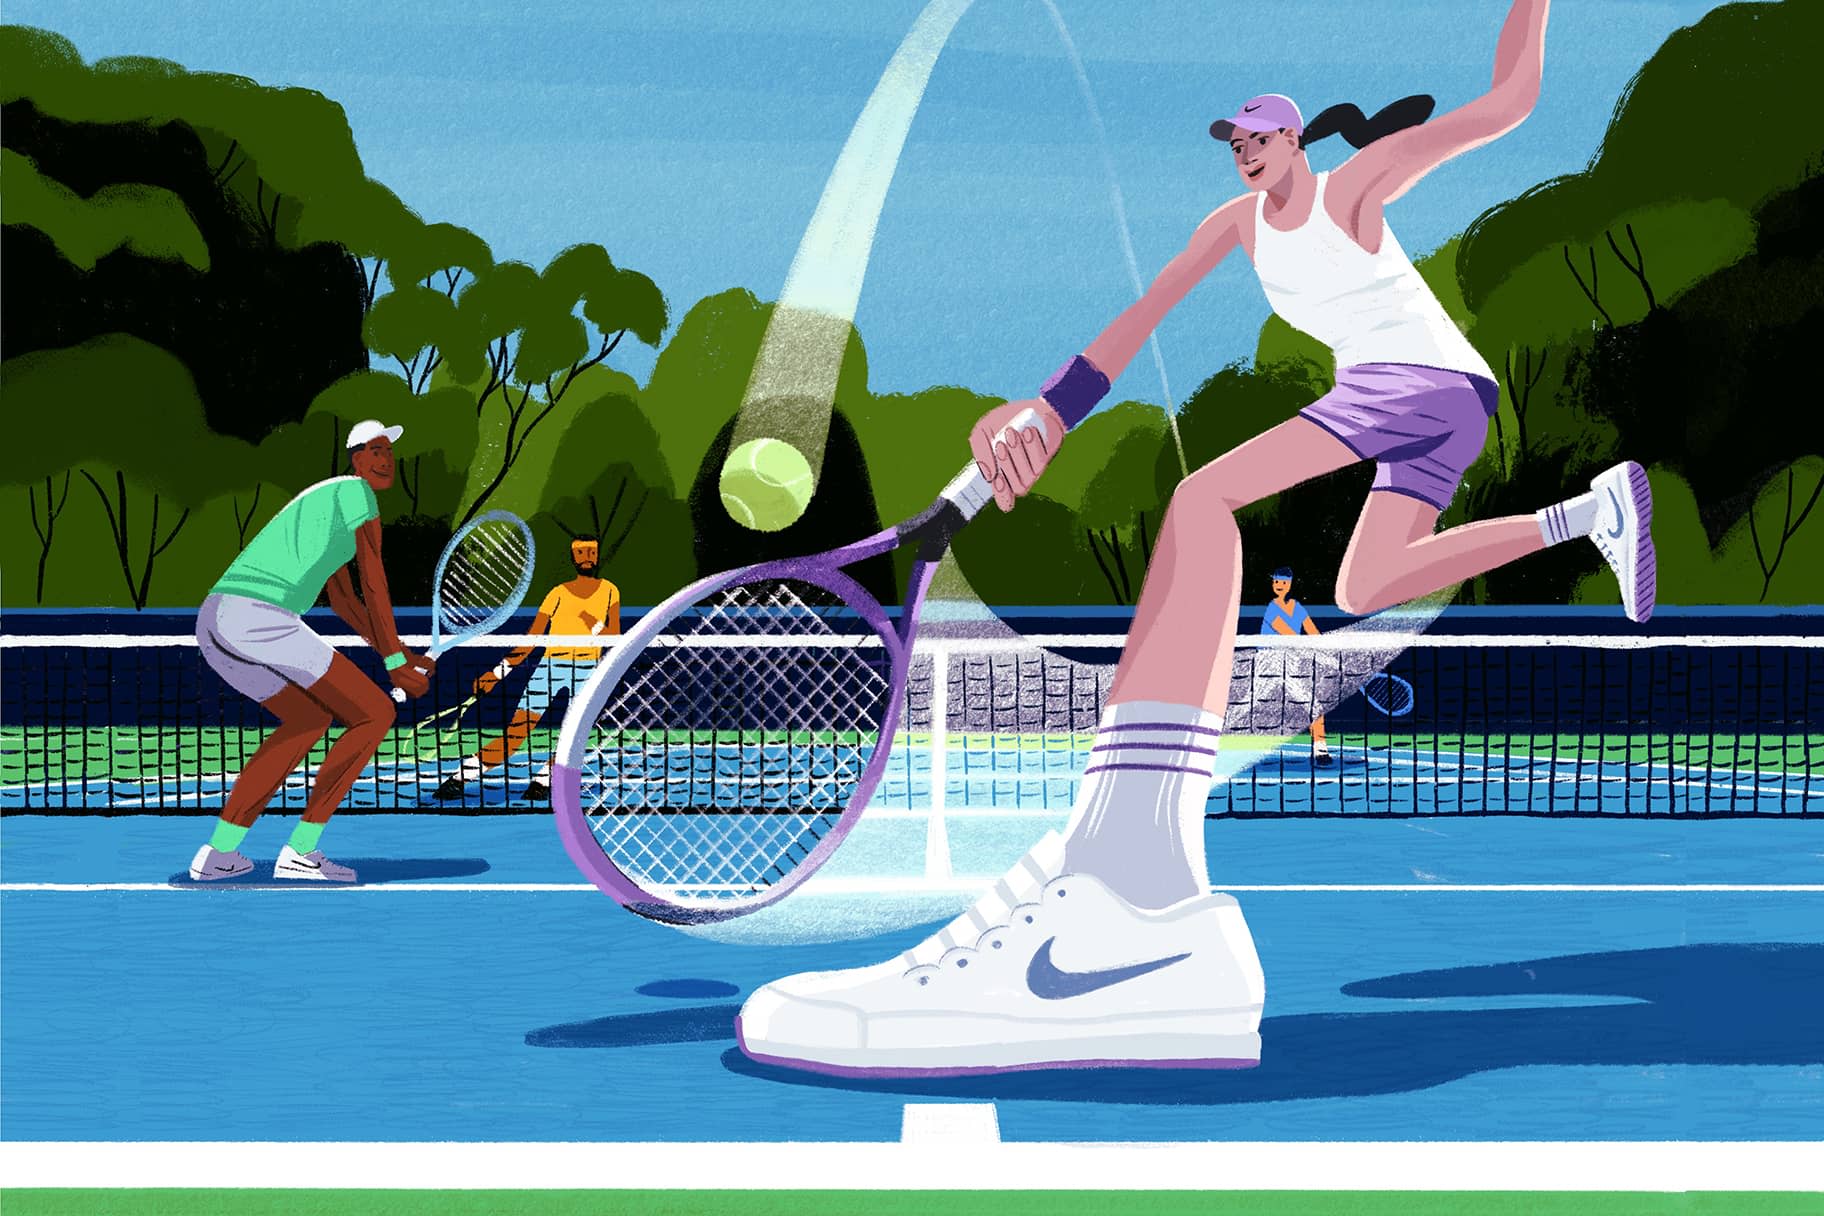 Doubles Tennis 101: A Beginner’s Guide to Doubles Tennis Rules, Tips and Strategies